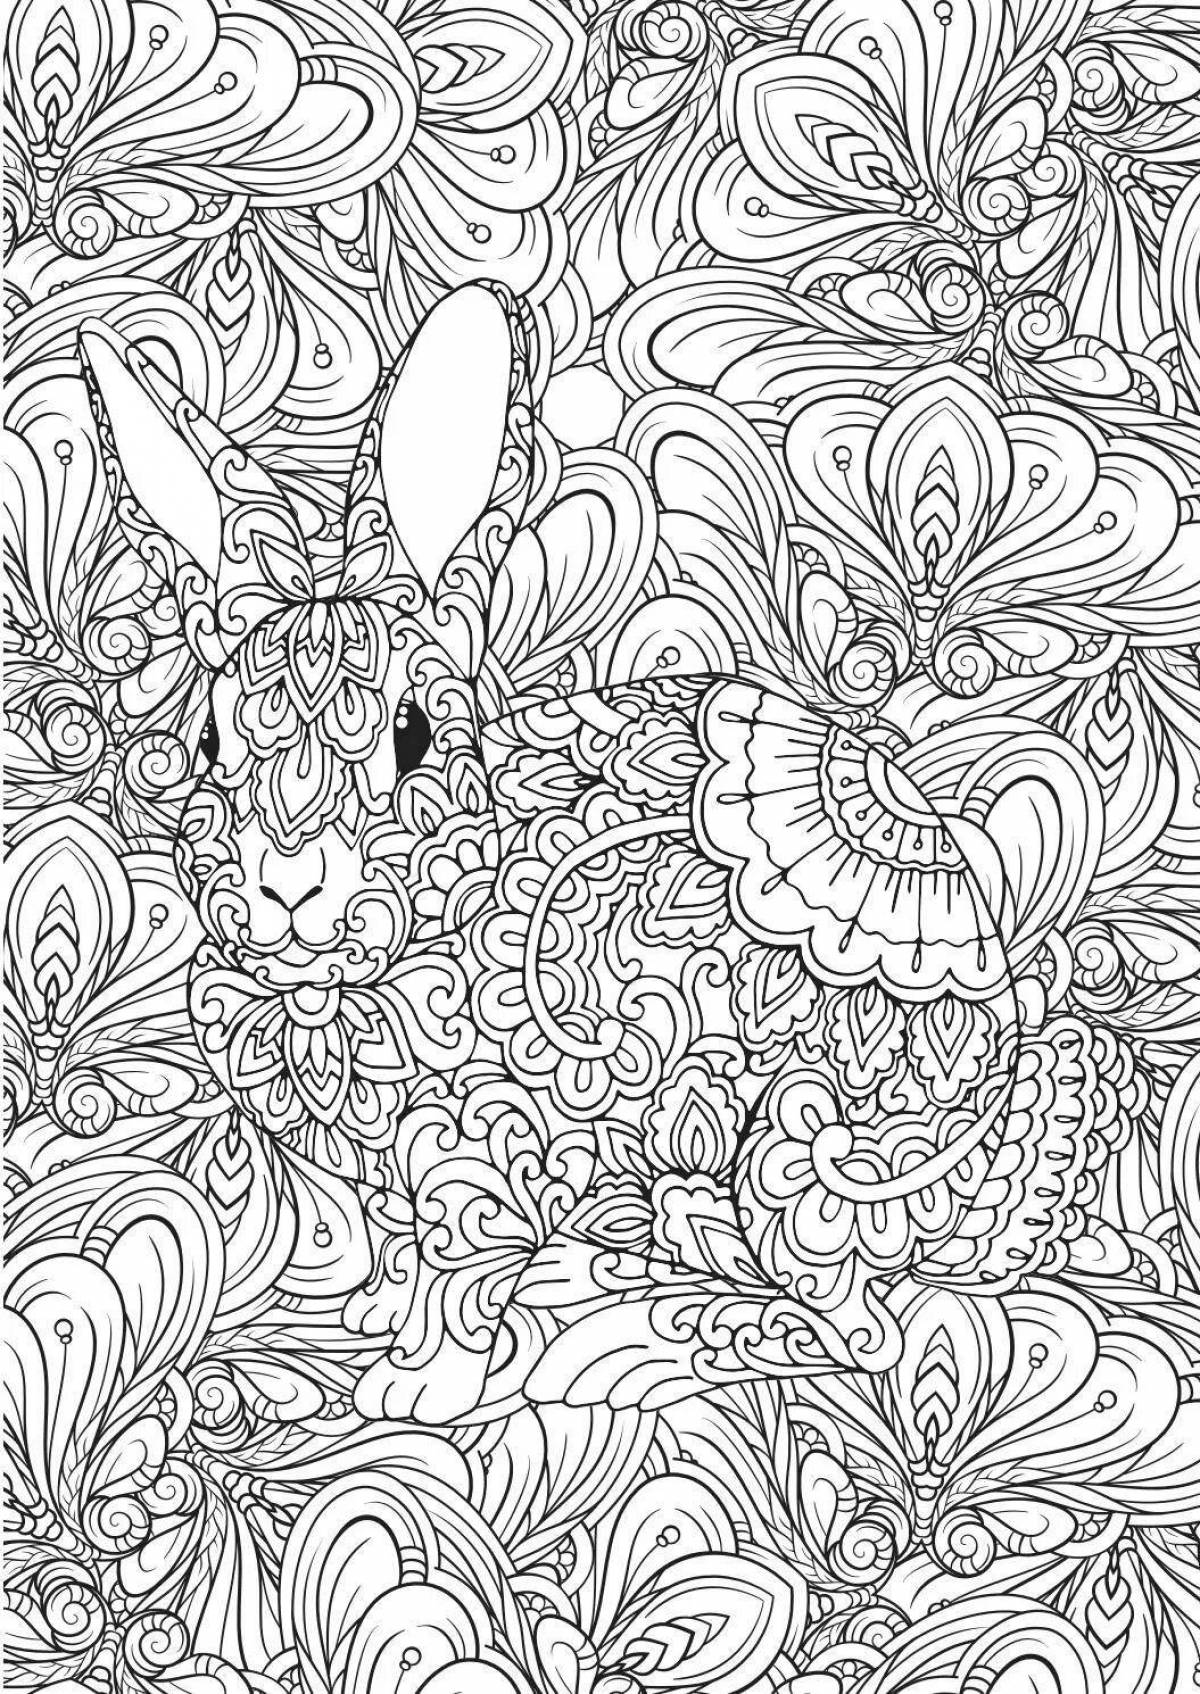 An inspirational anti-stress coloring book for adults